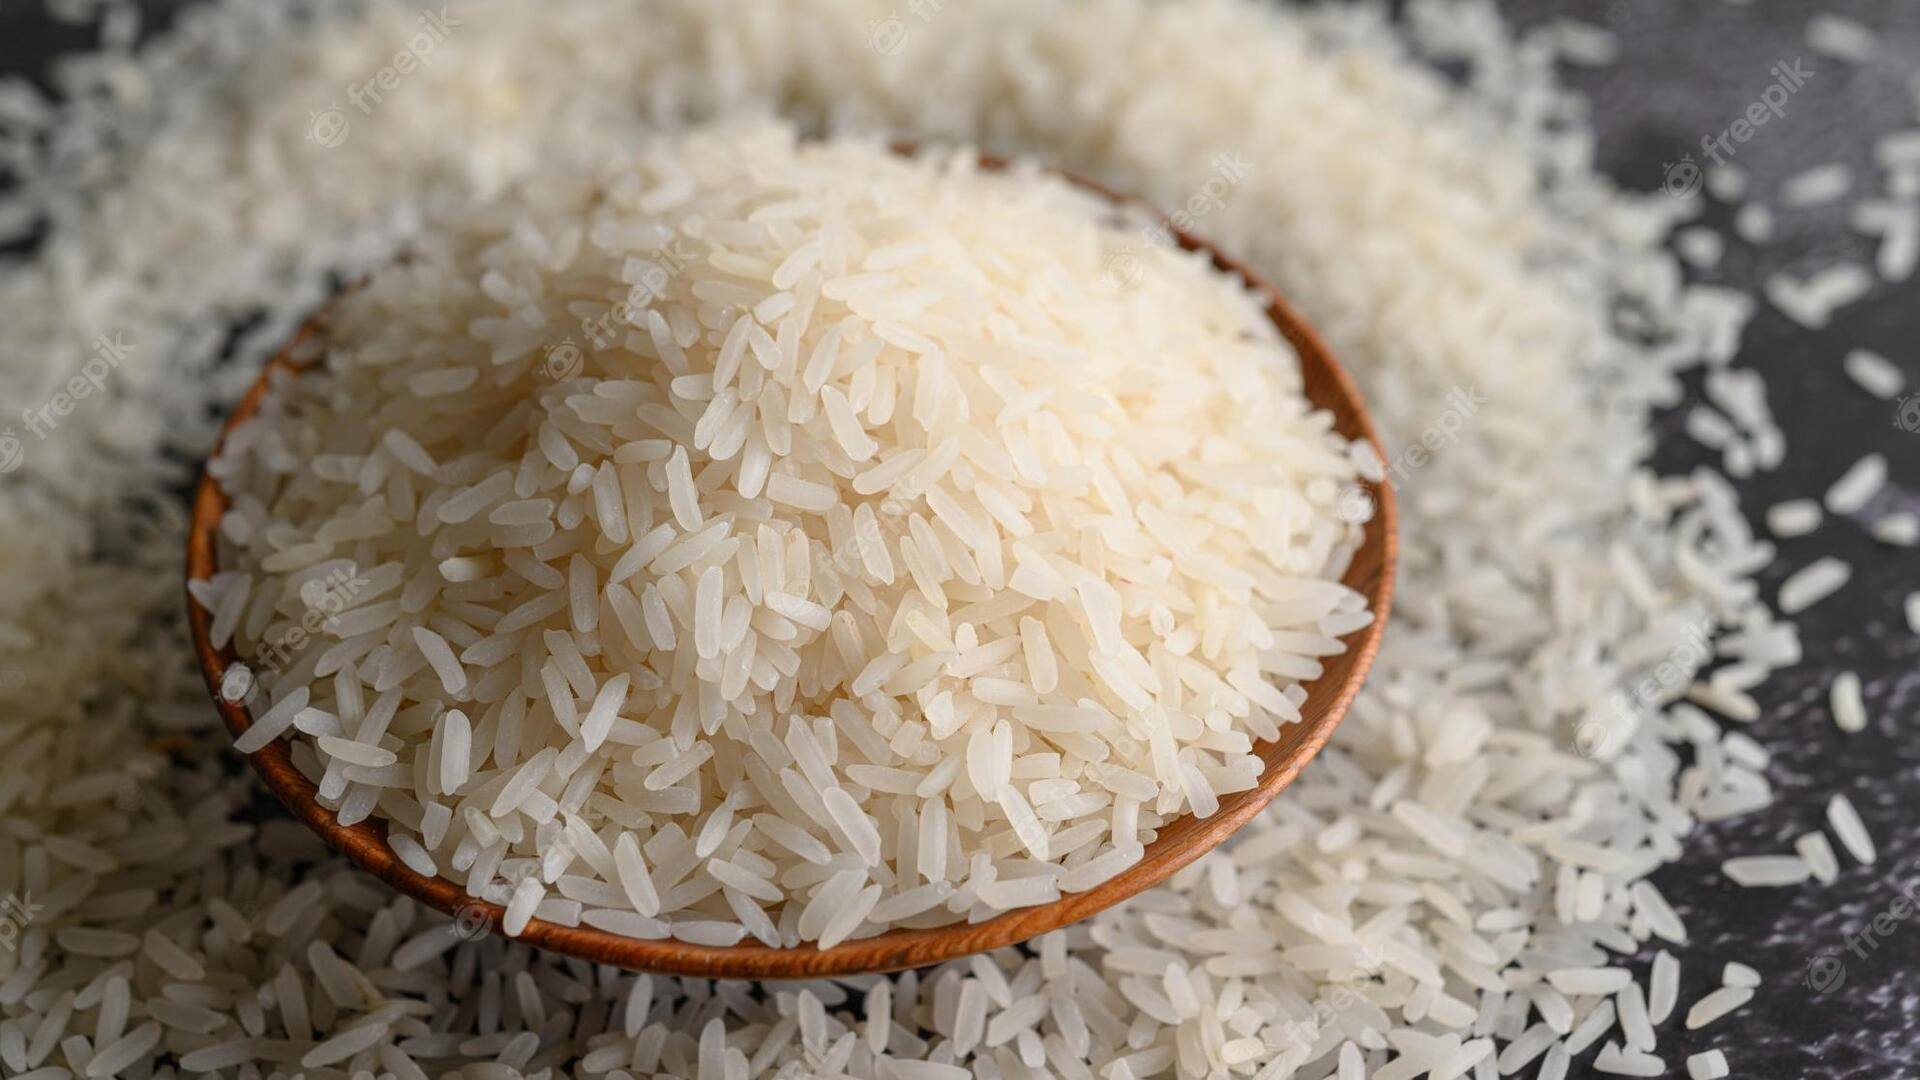 India imposes 20% export duty on parboiled rice